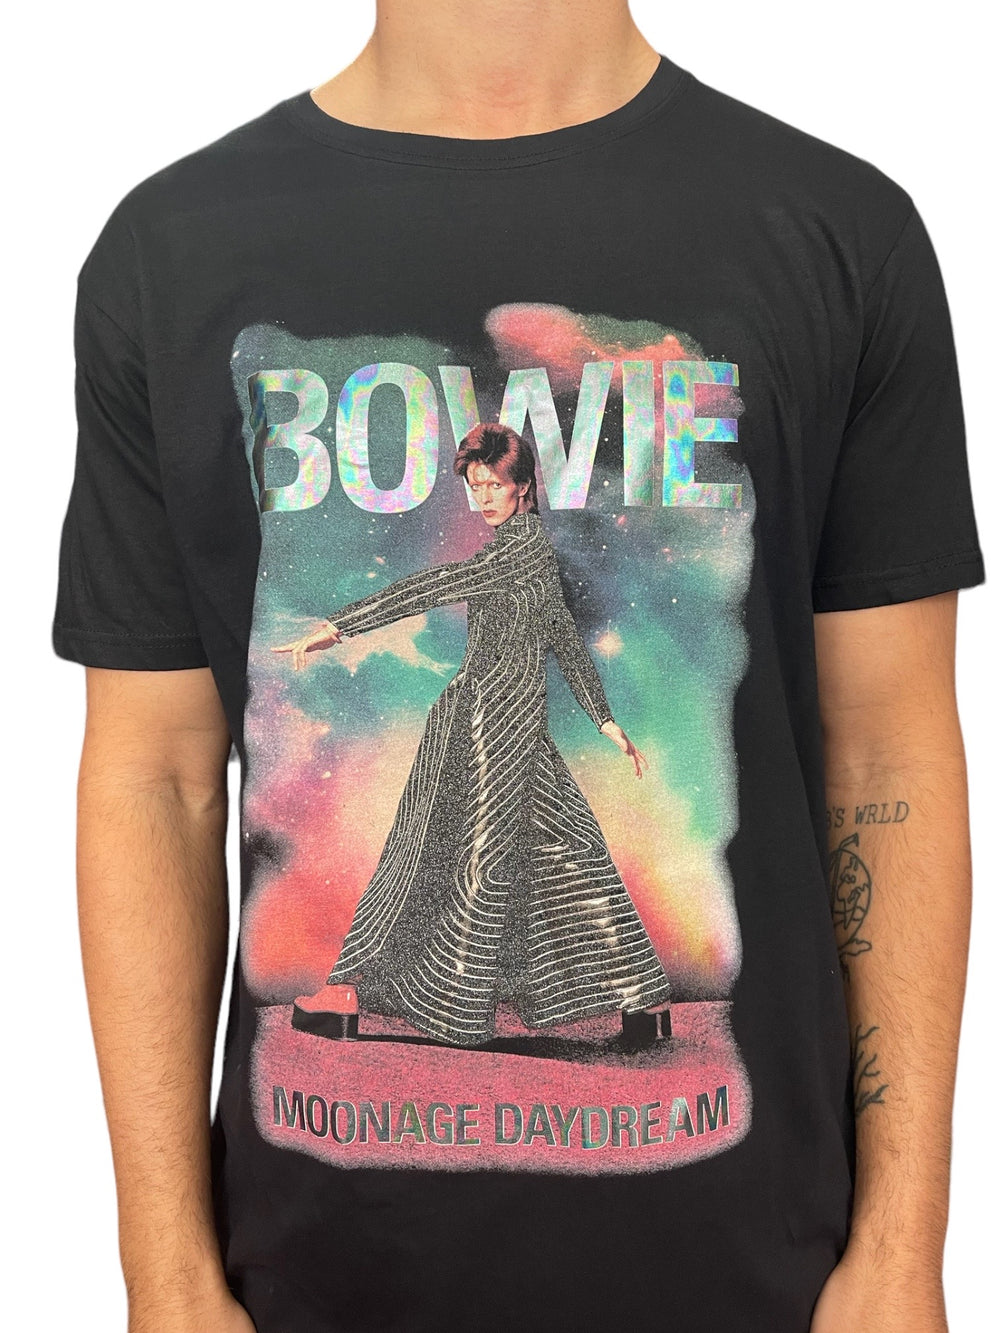 David Bowie - Moonage Daydream Fade Embellished Official Unisex T Shirt Brand New Various Sizes